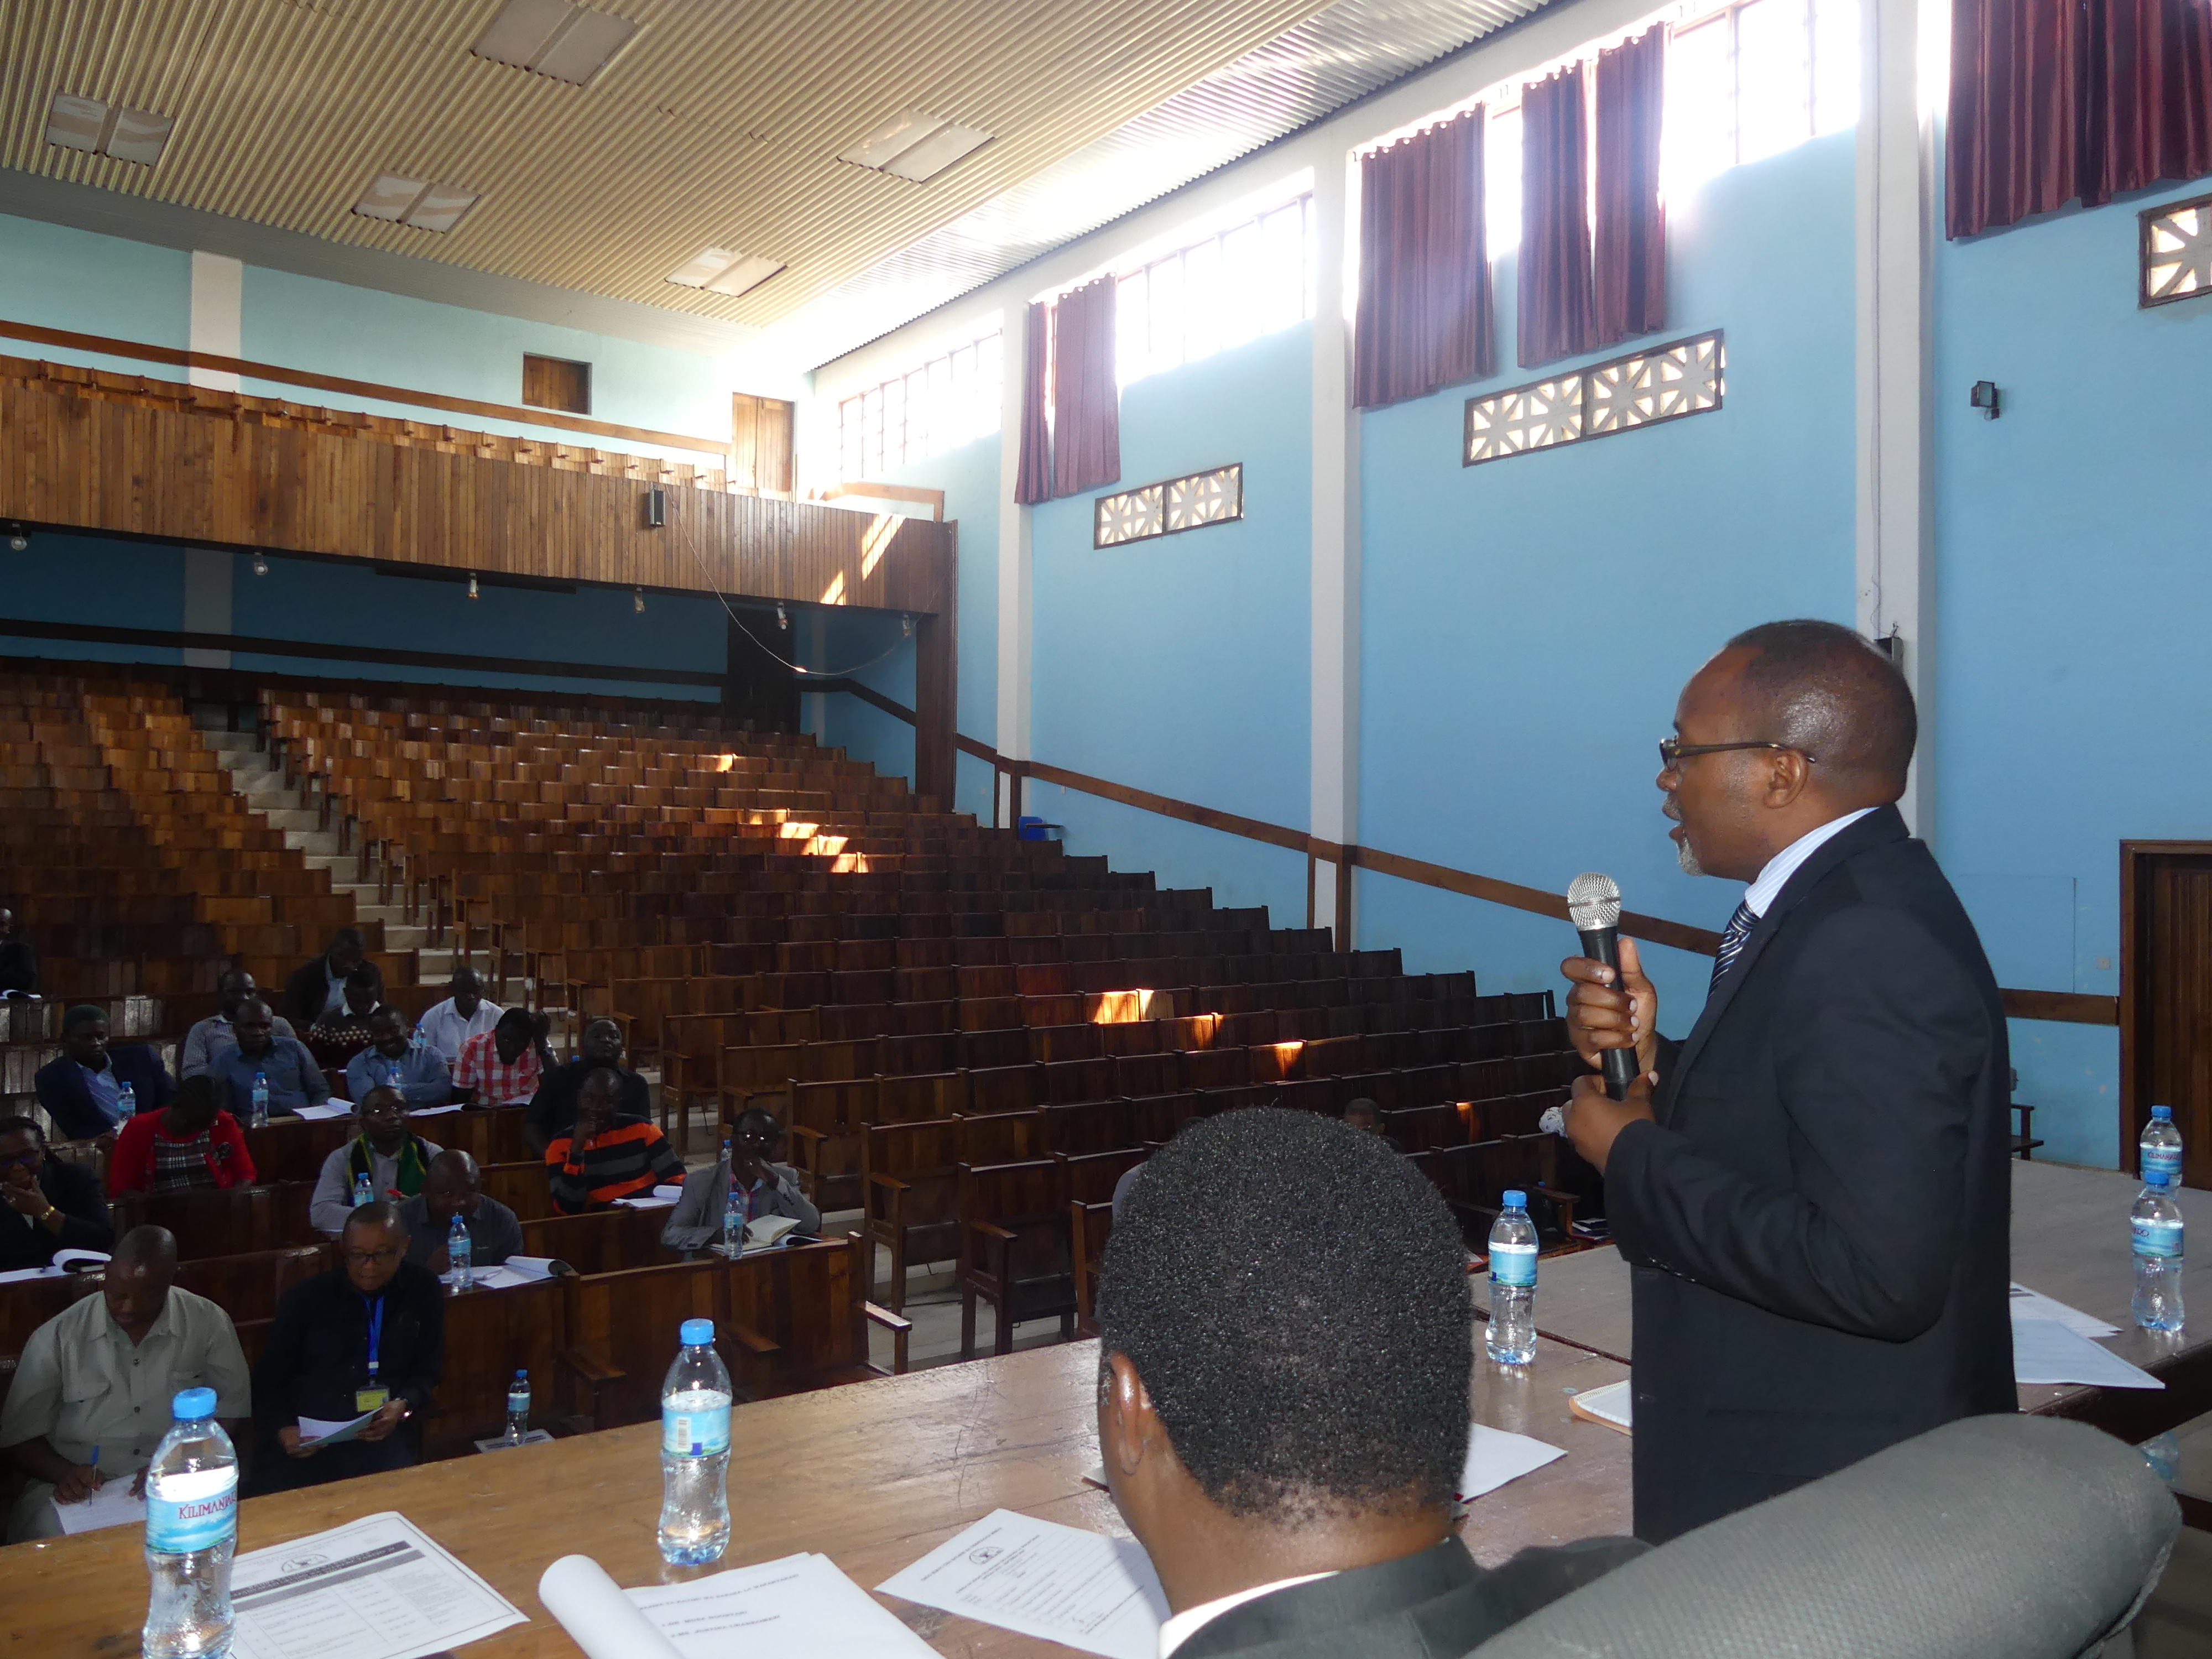 The Vice Chancellor of Mbeya University of Science and Technology, Prof. Aloys Mvuma giving his remarks during the inauguration of the third Workers Council of the University on November 24 at the Nyerere Hall